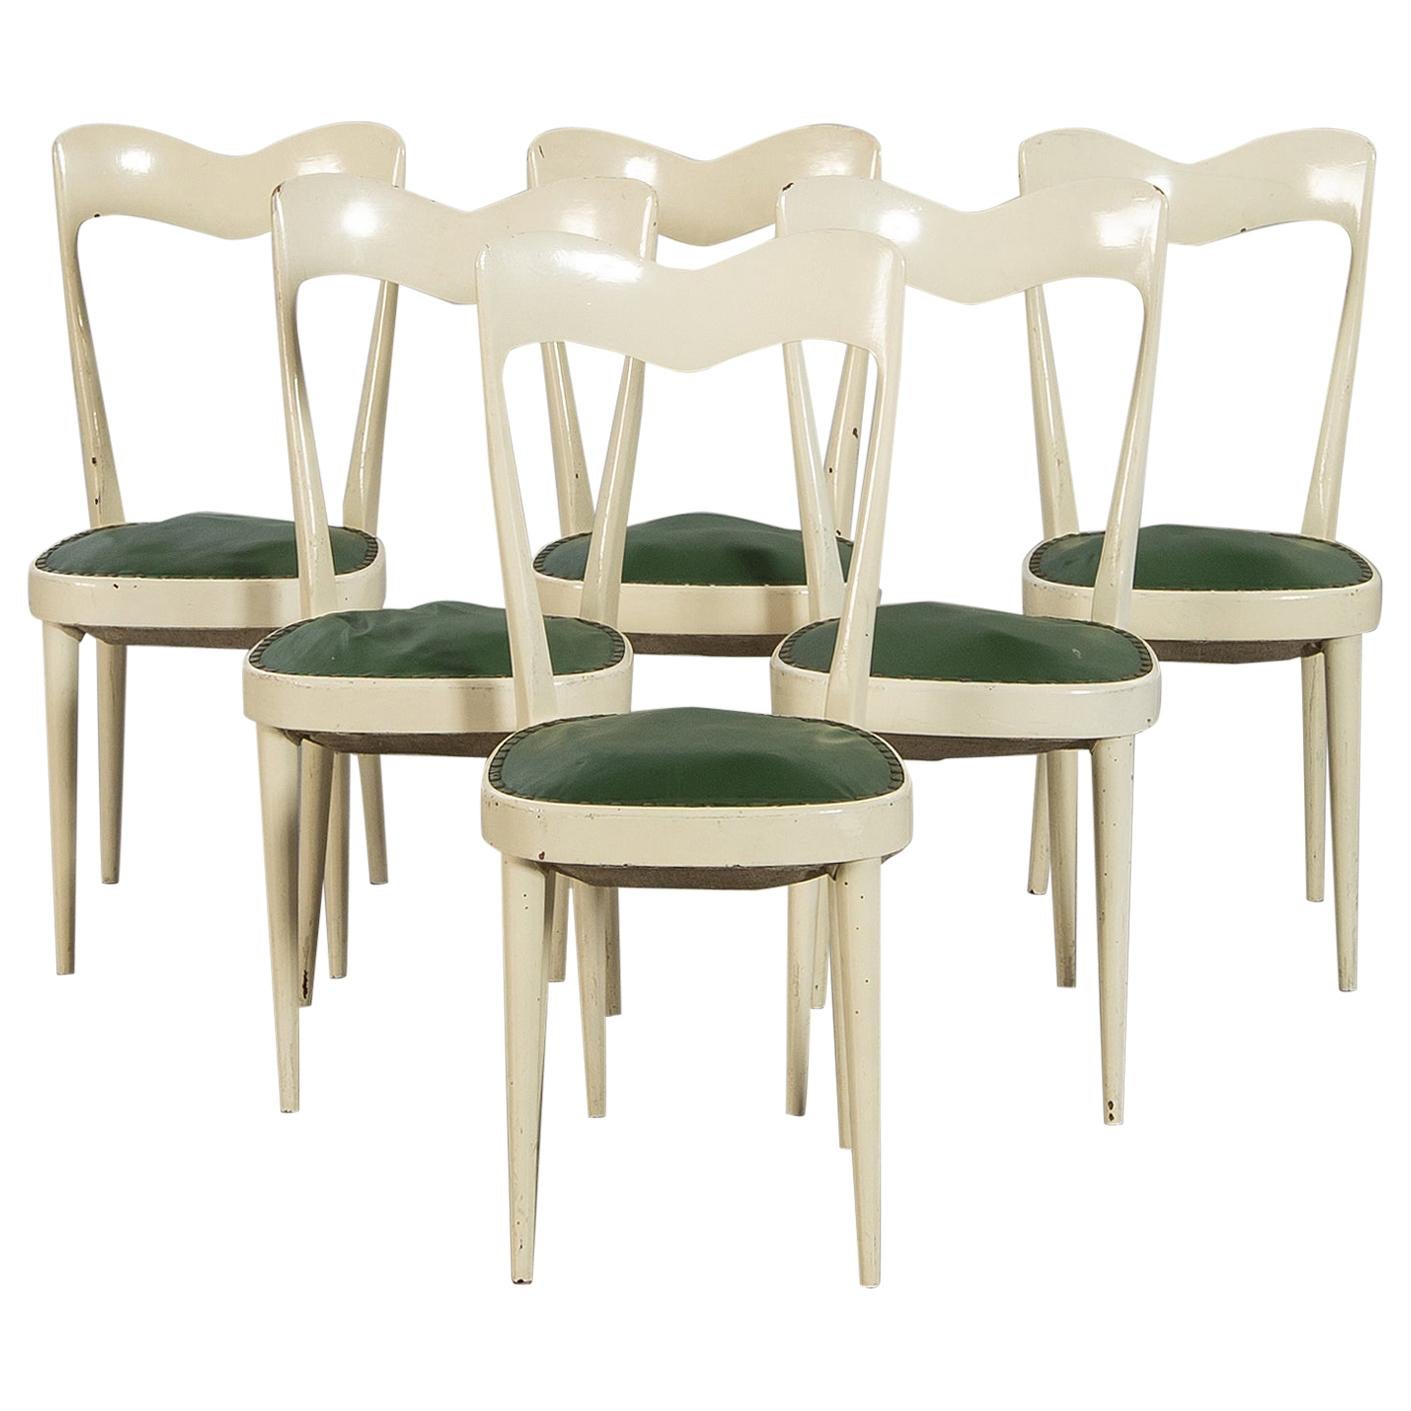 Set of 6 Mid Century Dining Chairs with Green Seats